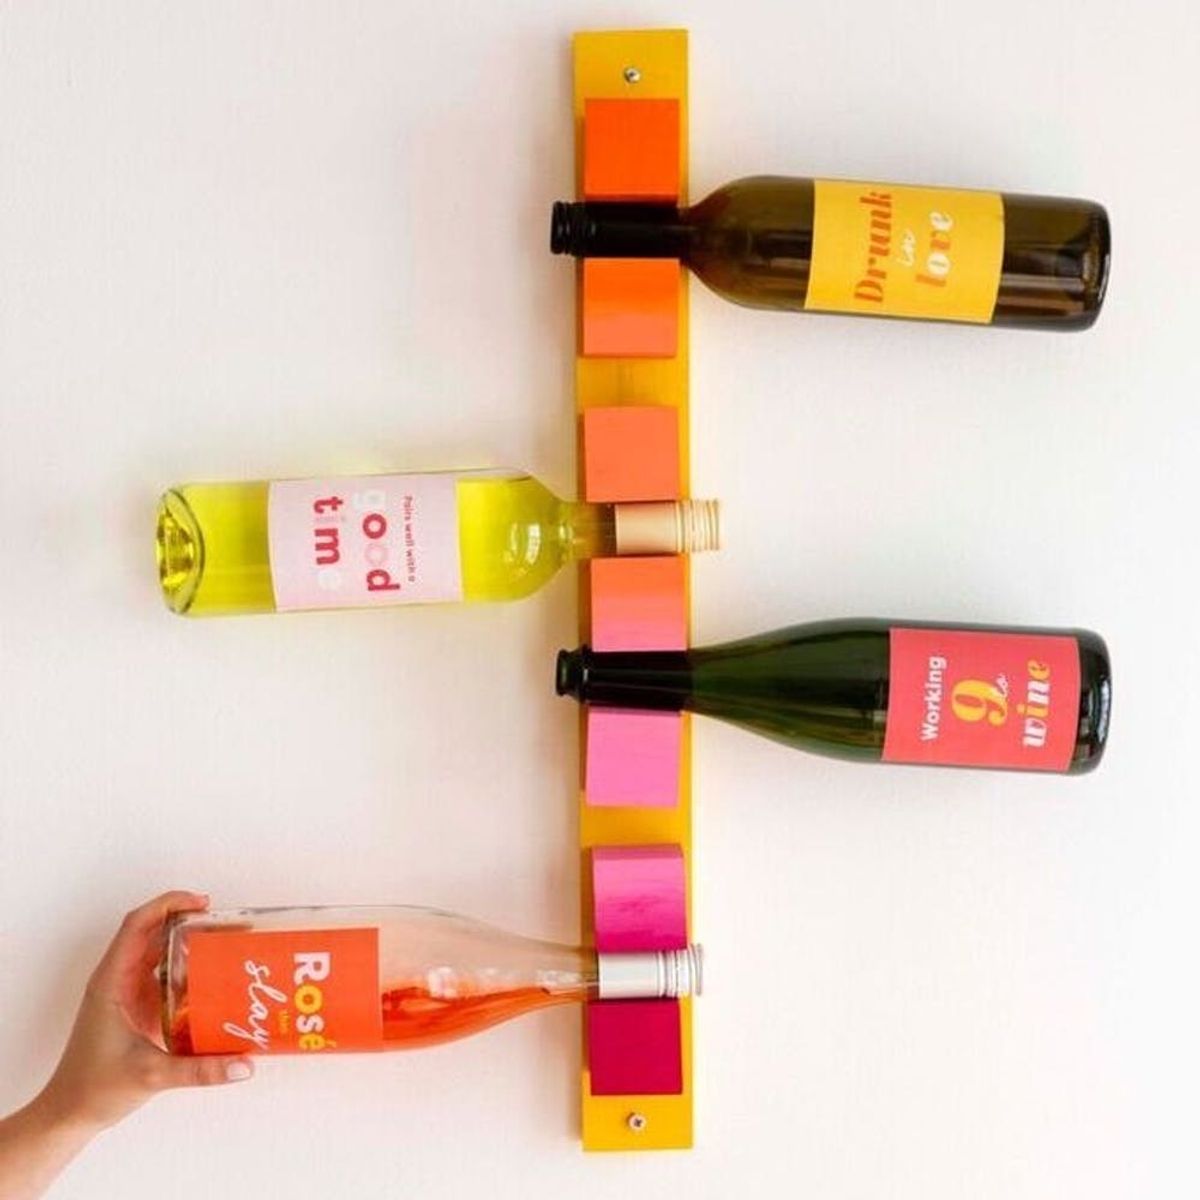 Celebrate National Wine Day With This Colorful Wine Rack DIY